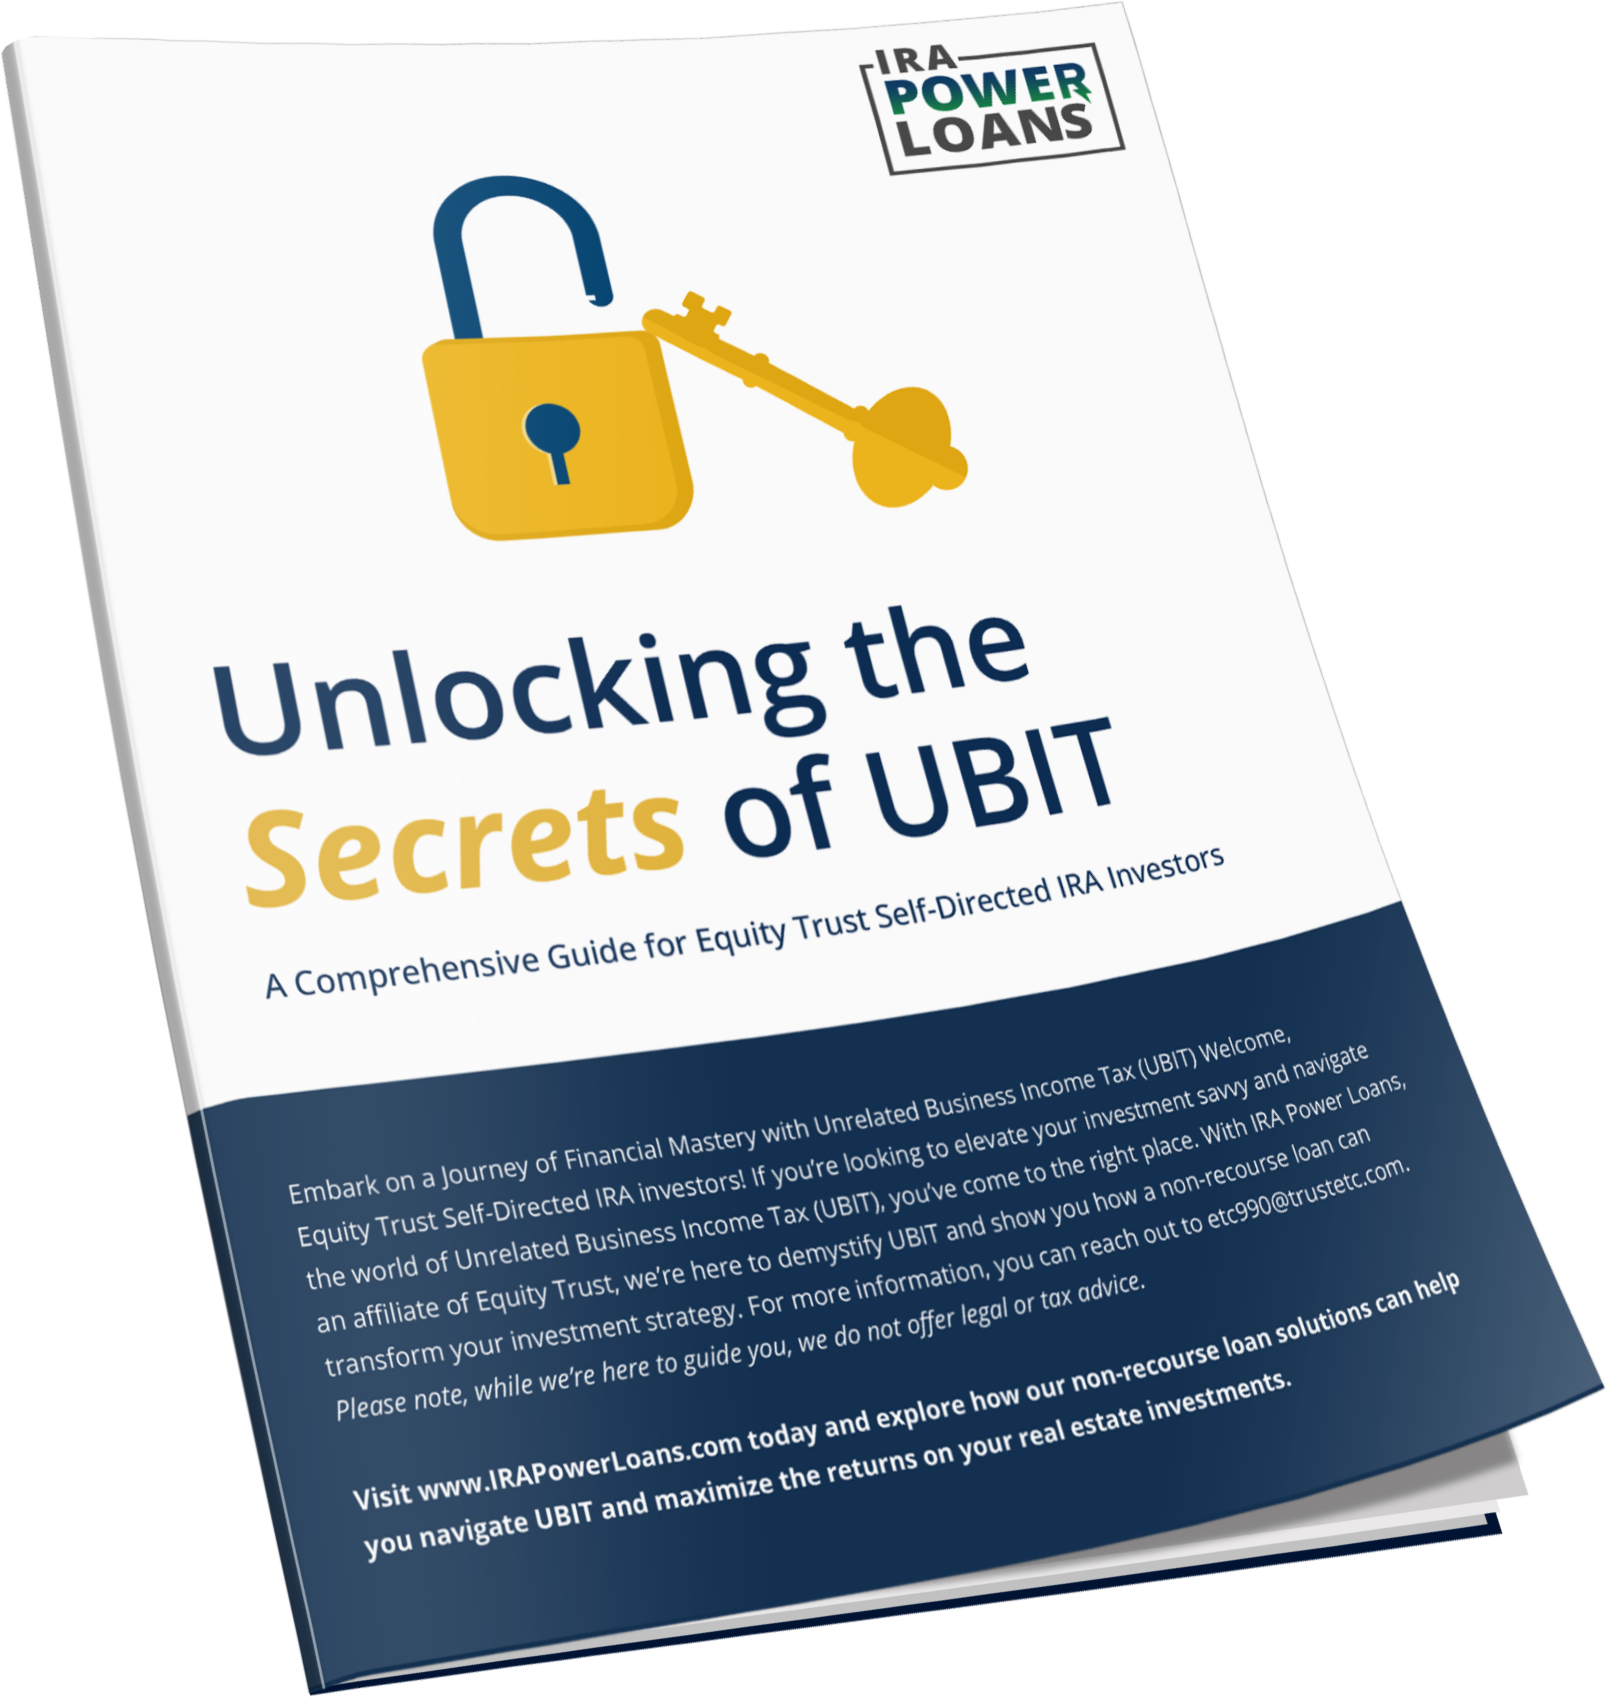 UBIT guide for IRA investments